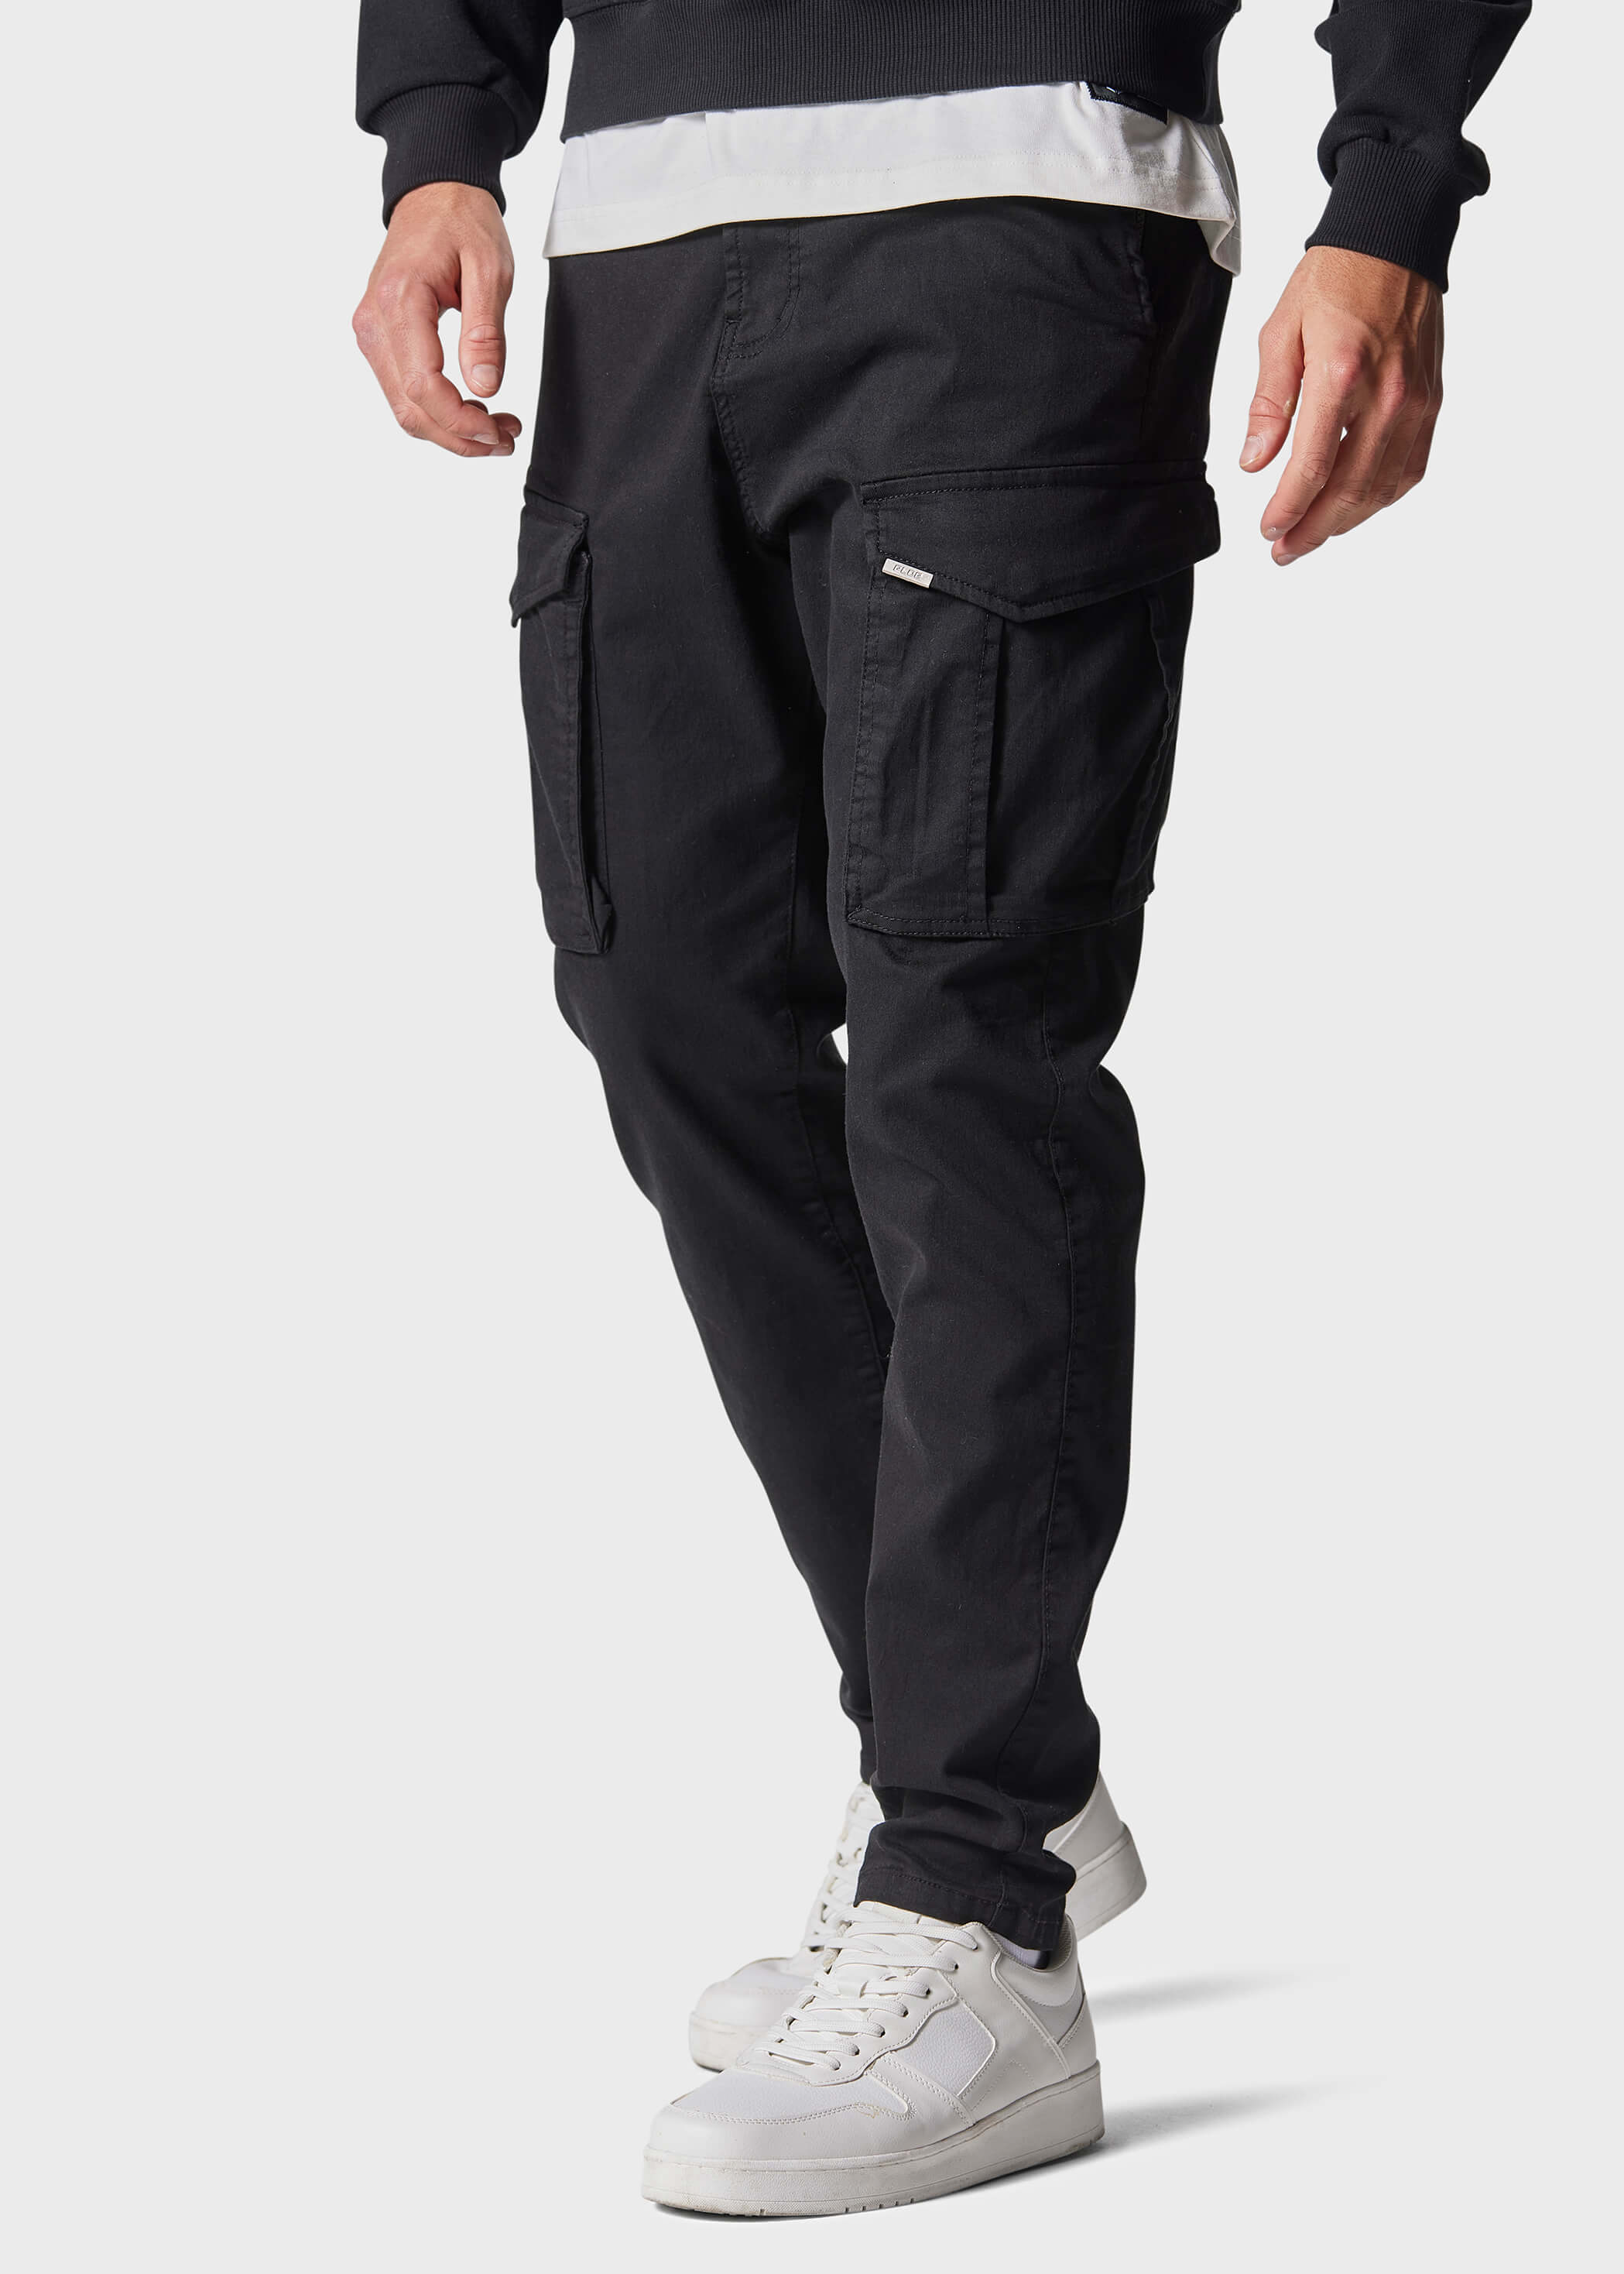 Buy Police Cargo Pants Online on Ubuy India at Best Prices